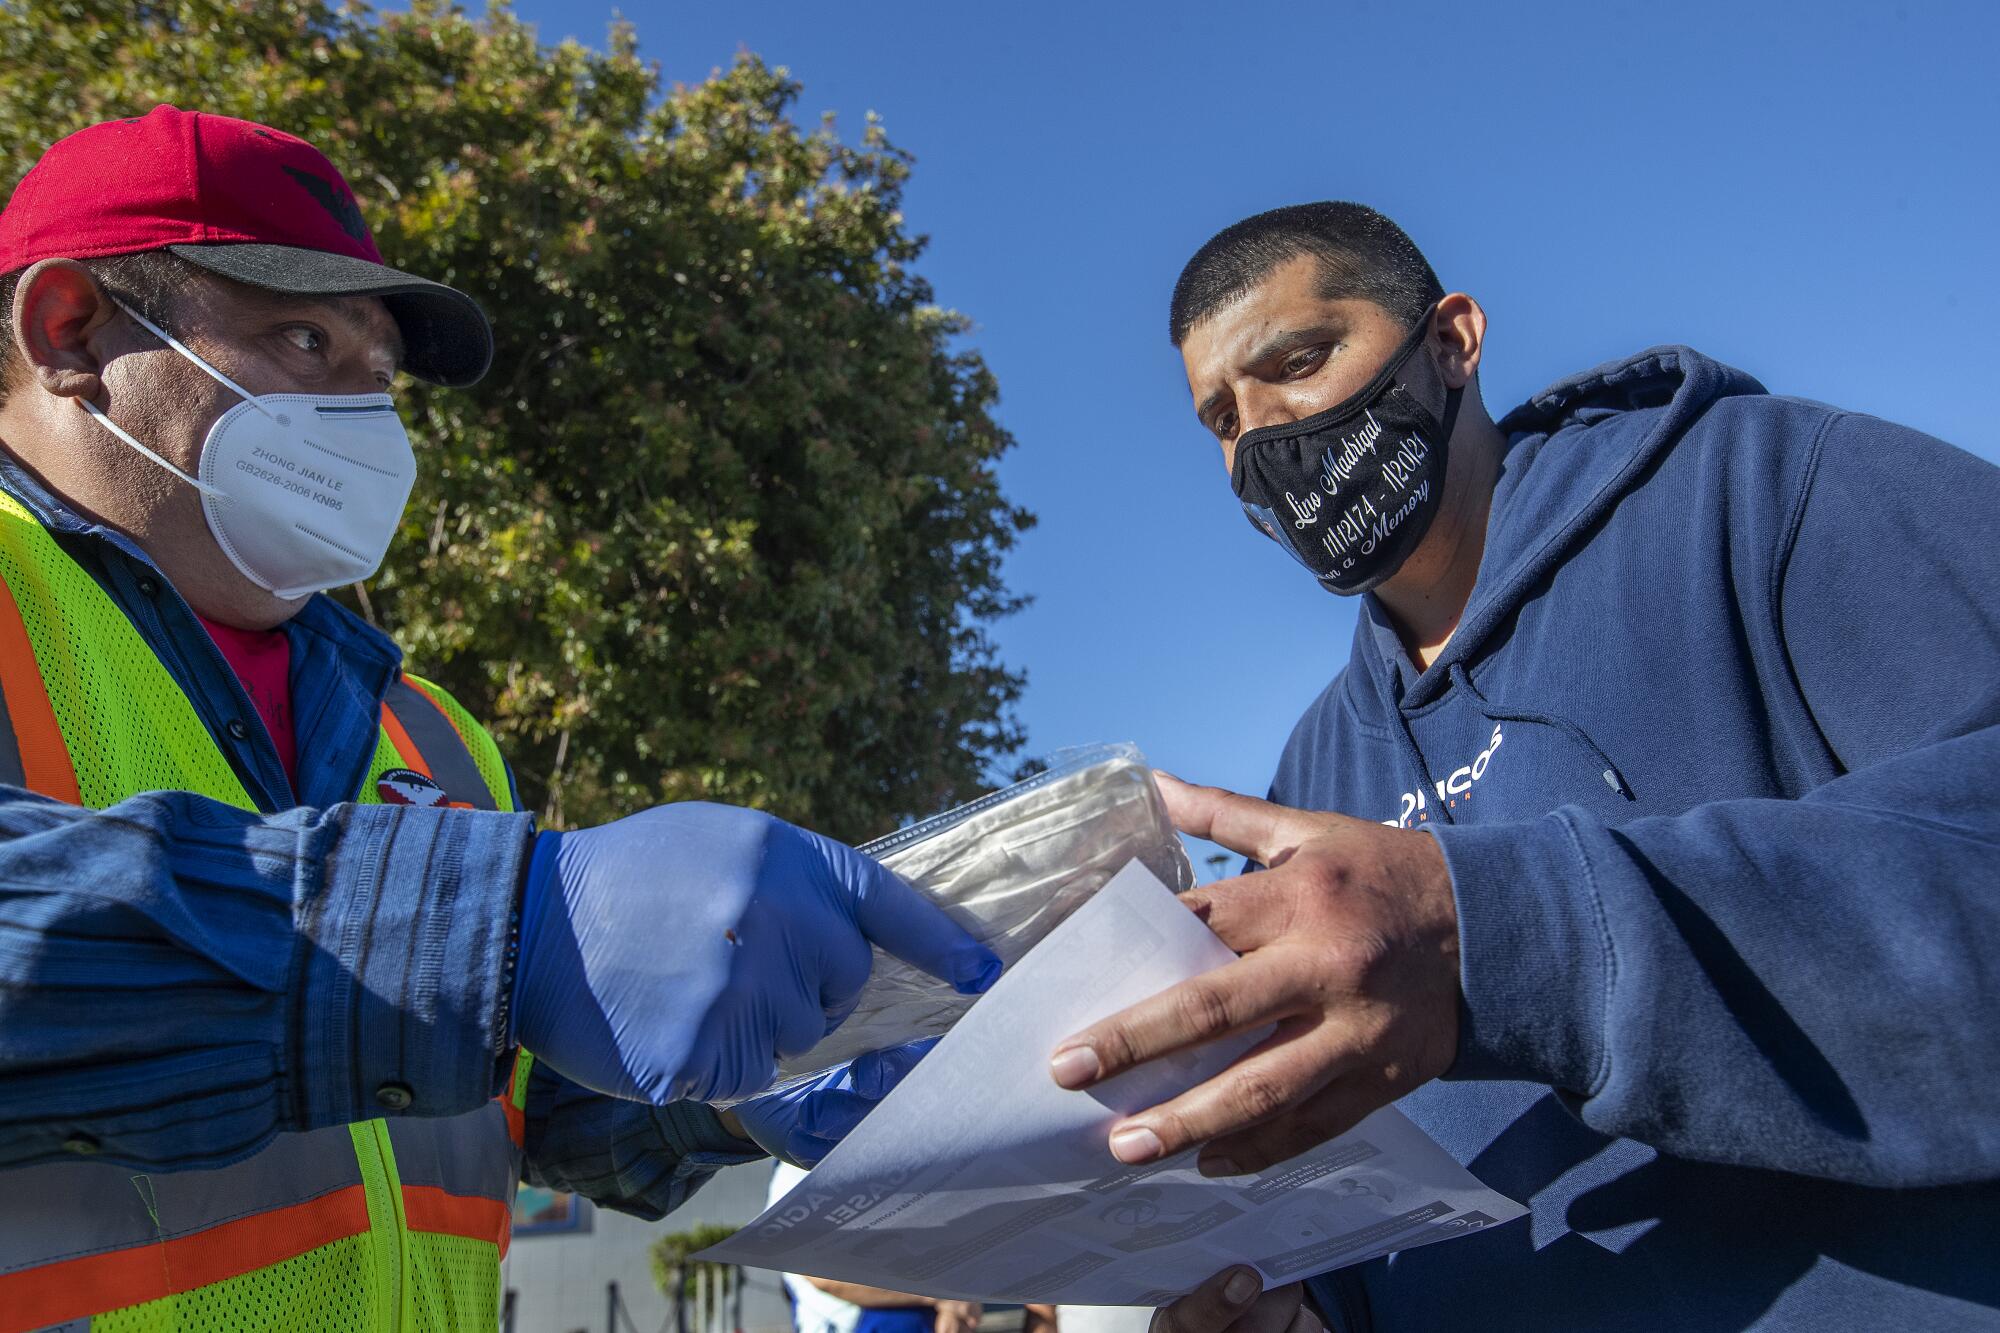 Salvador Villasenor, left, a volunteer with UFW, hands a packet containing cloth masks to Lompoc resident Richard Lopez.